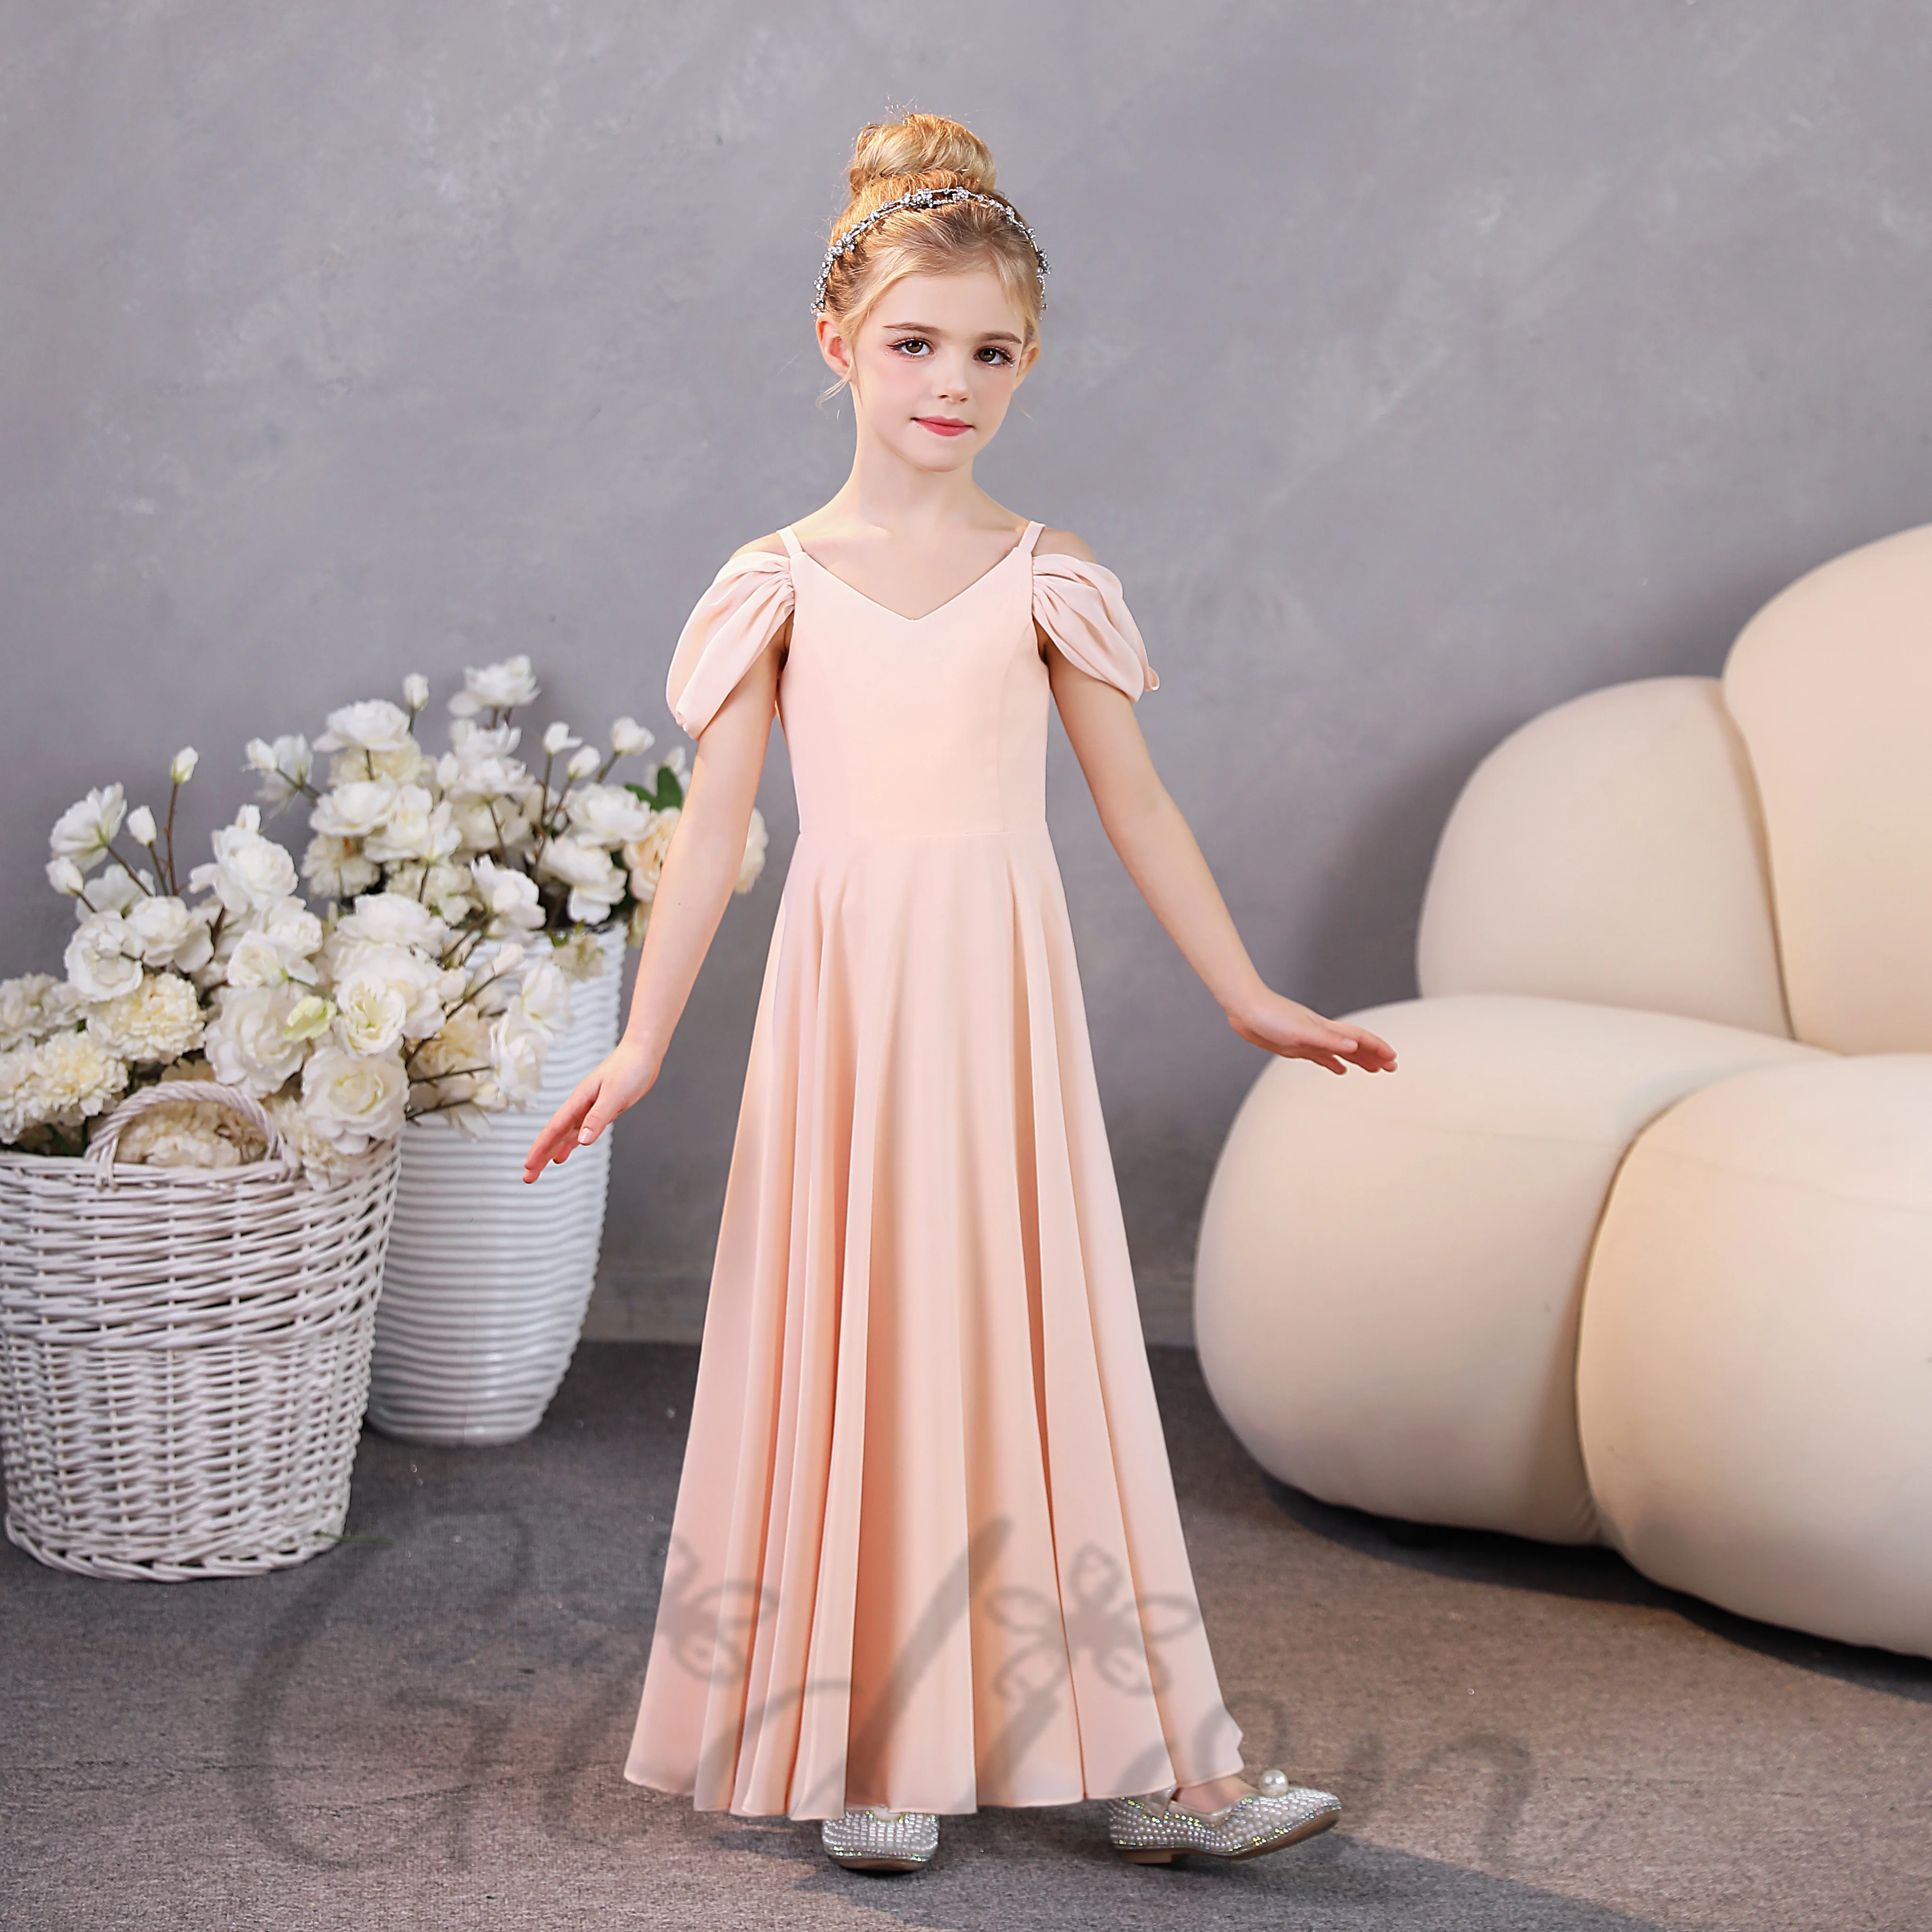 

Spaghetti Straps Junior Bridesmaid Dress For Kids Wedding Ceremony Pageant Ball Evening-Gown Show Gift Birthday Party Any Event